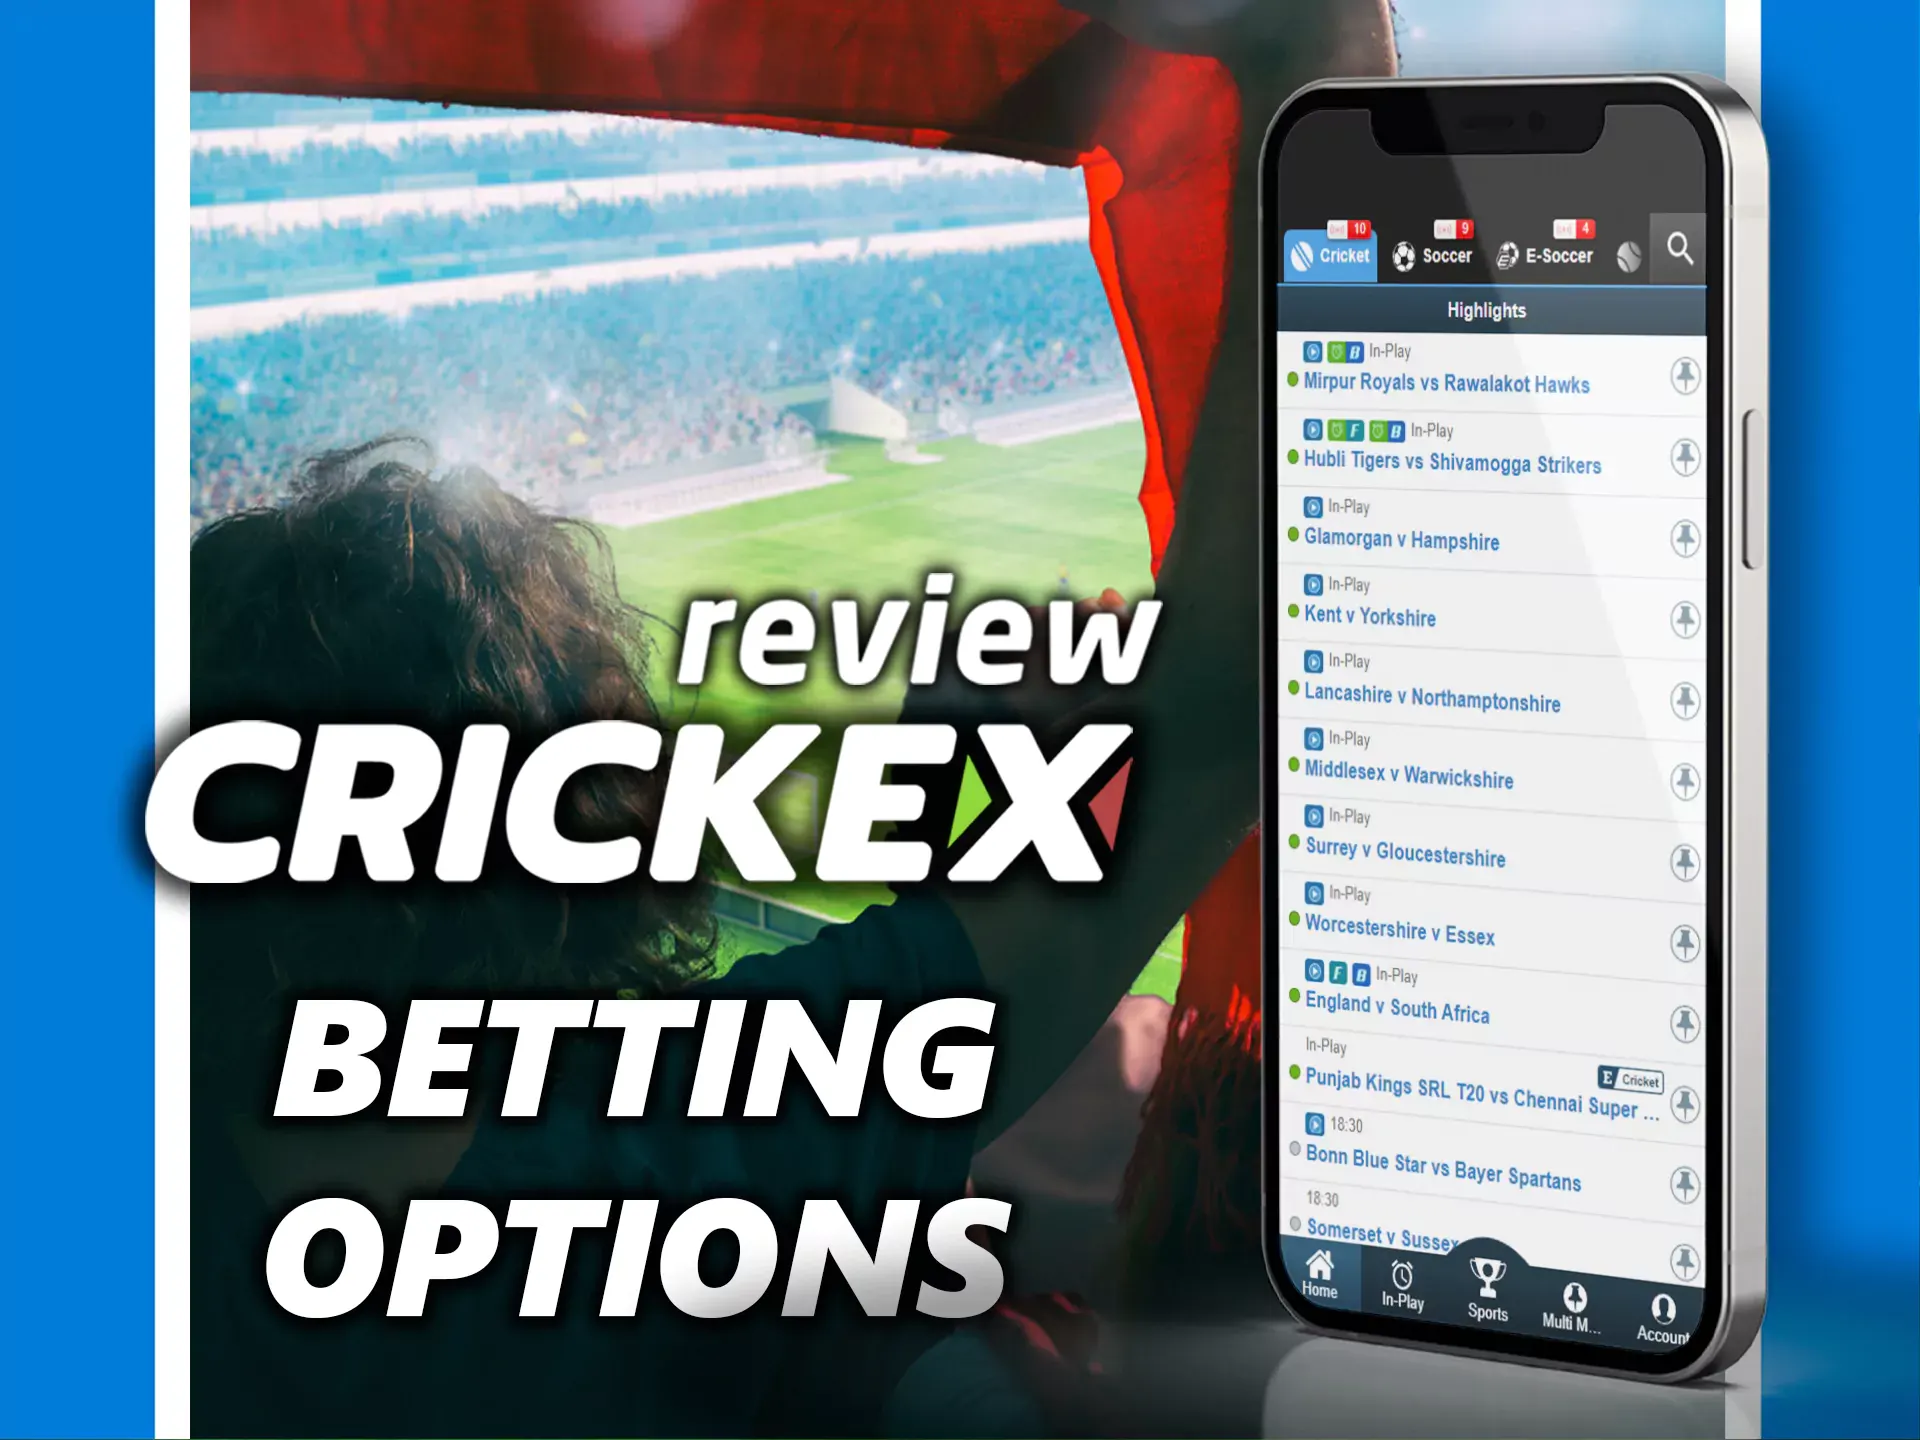 The Crickex app offers a variety of sports betting options.